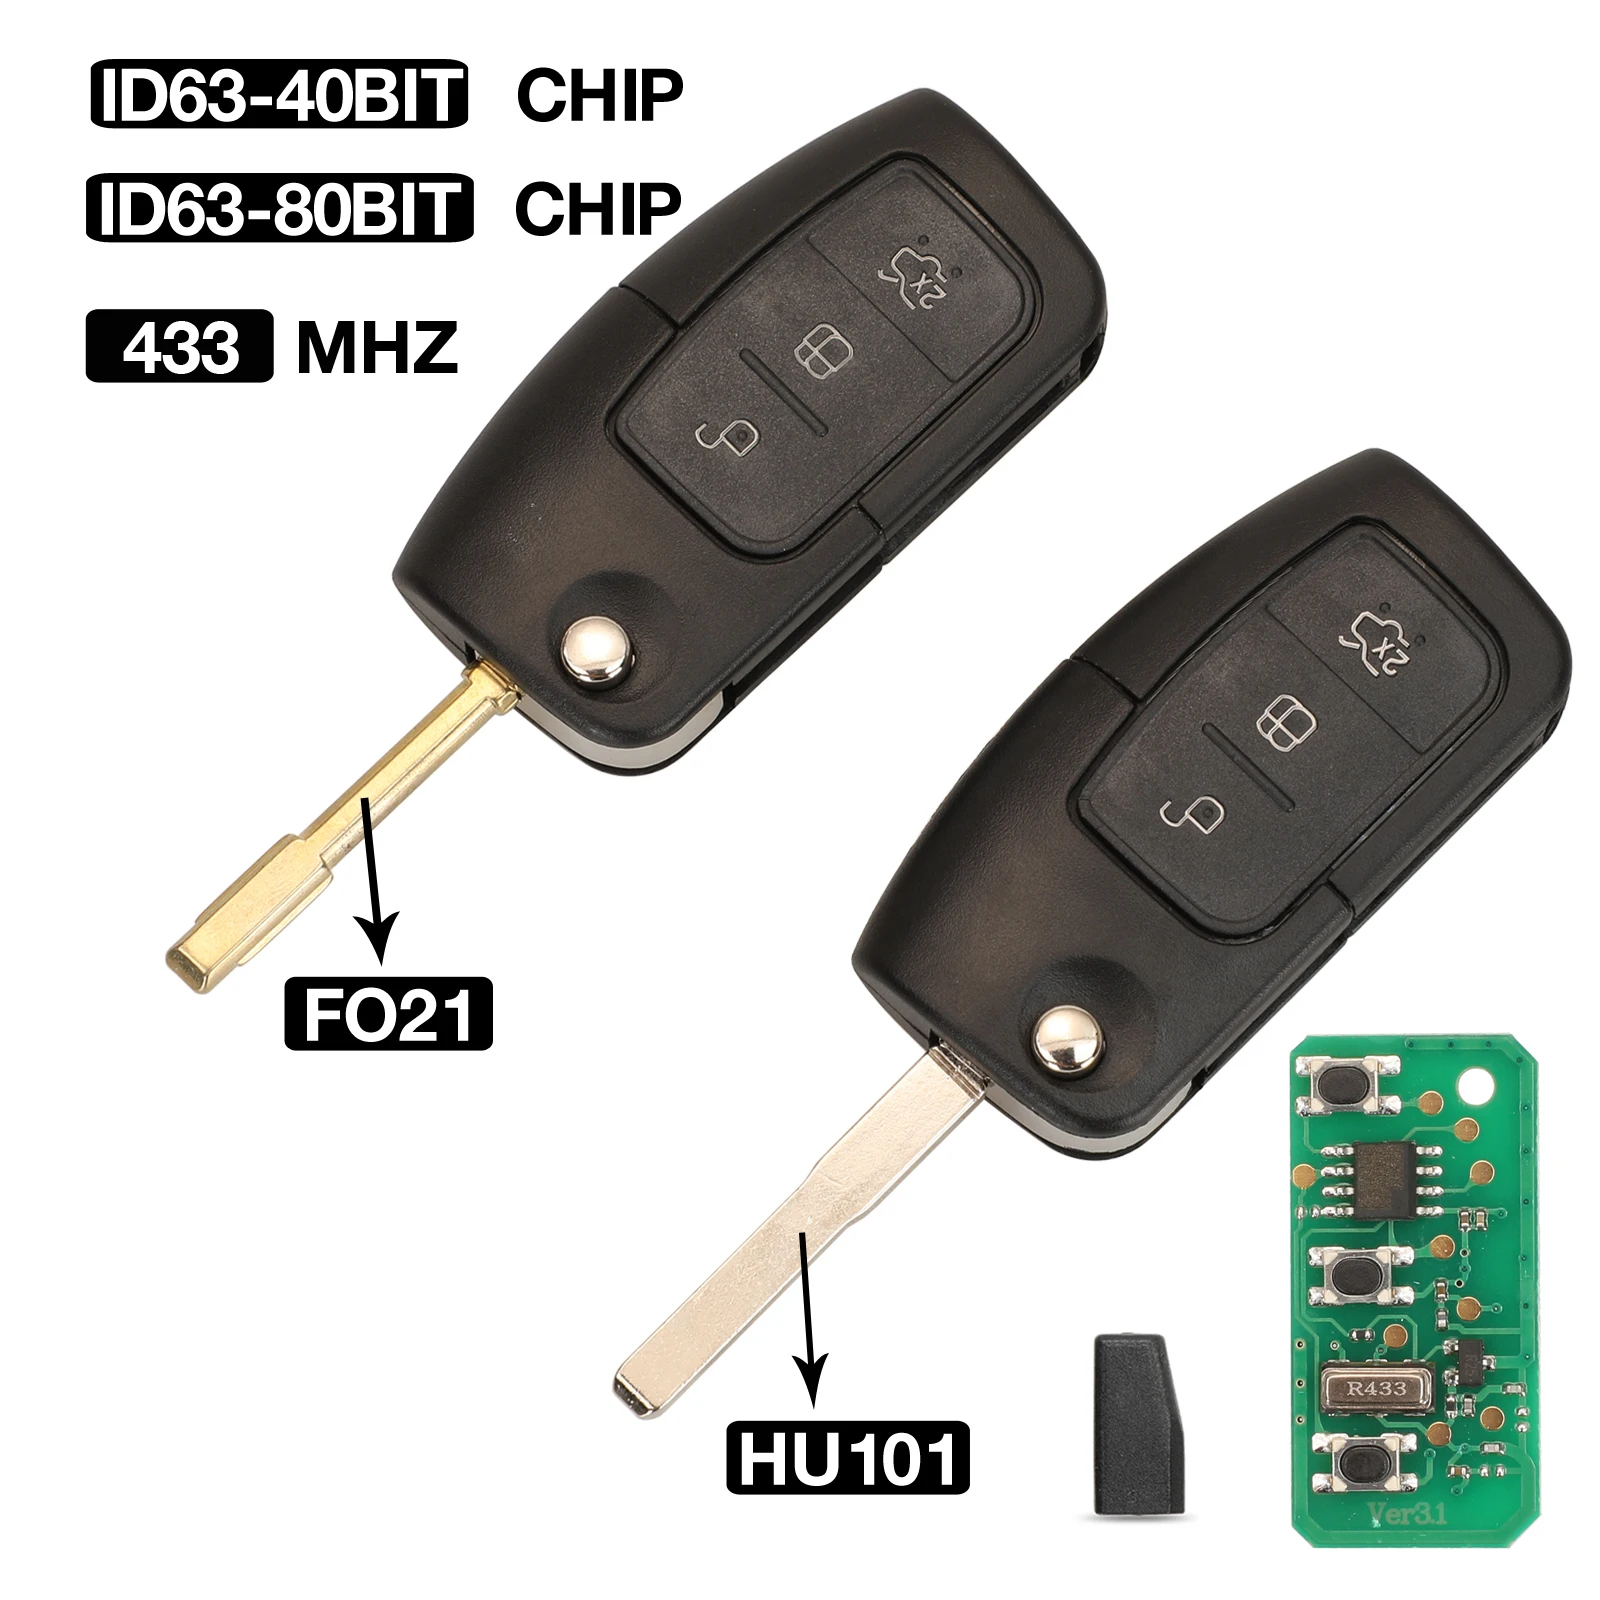 

jingyuqin 3 Buttons Keyless Entry ASK 433MHz Remote Car Key Fob For Ford Focus Mondeo C Max S Max Galaxy Fiesta HU101/FO21 Blade